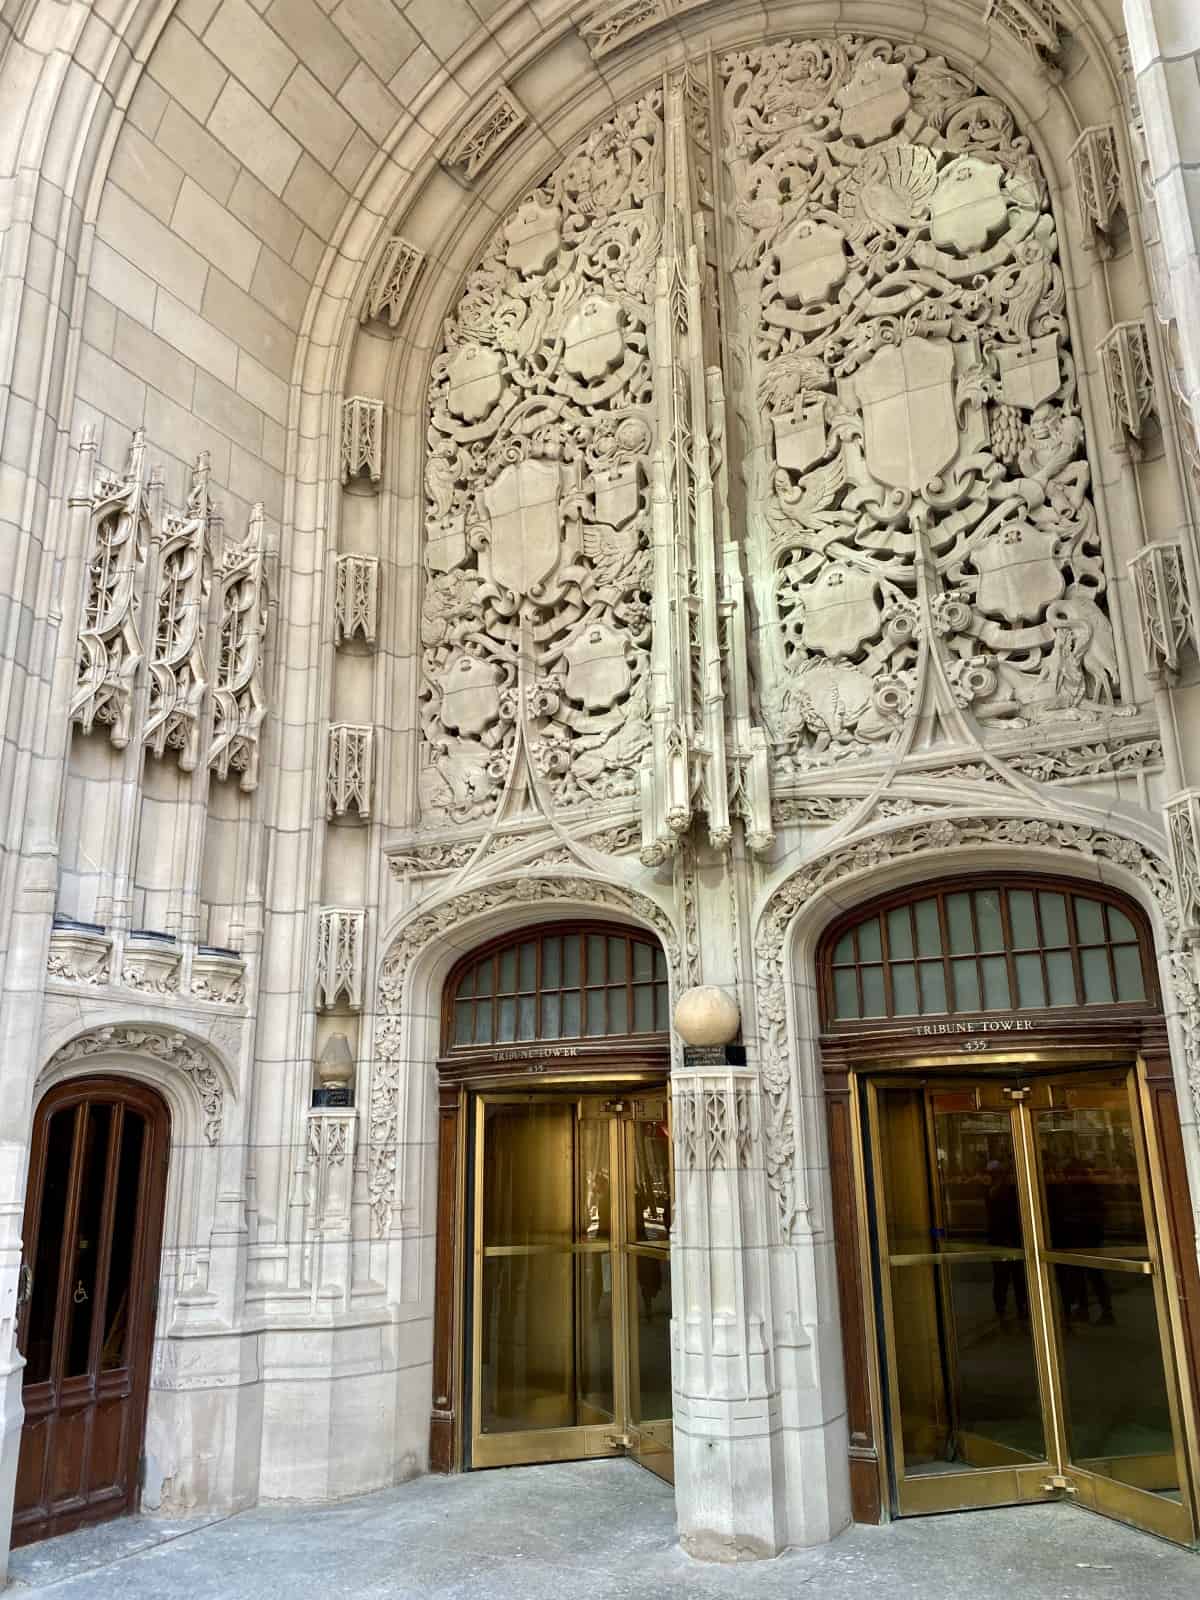 Things to do in Chicago for first-timers - appreciate the varied & historic architecture